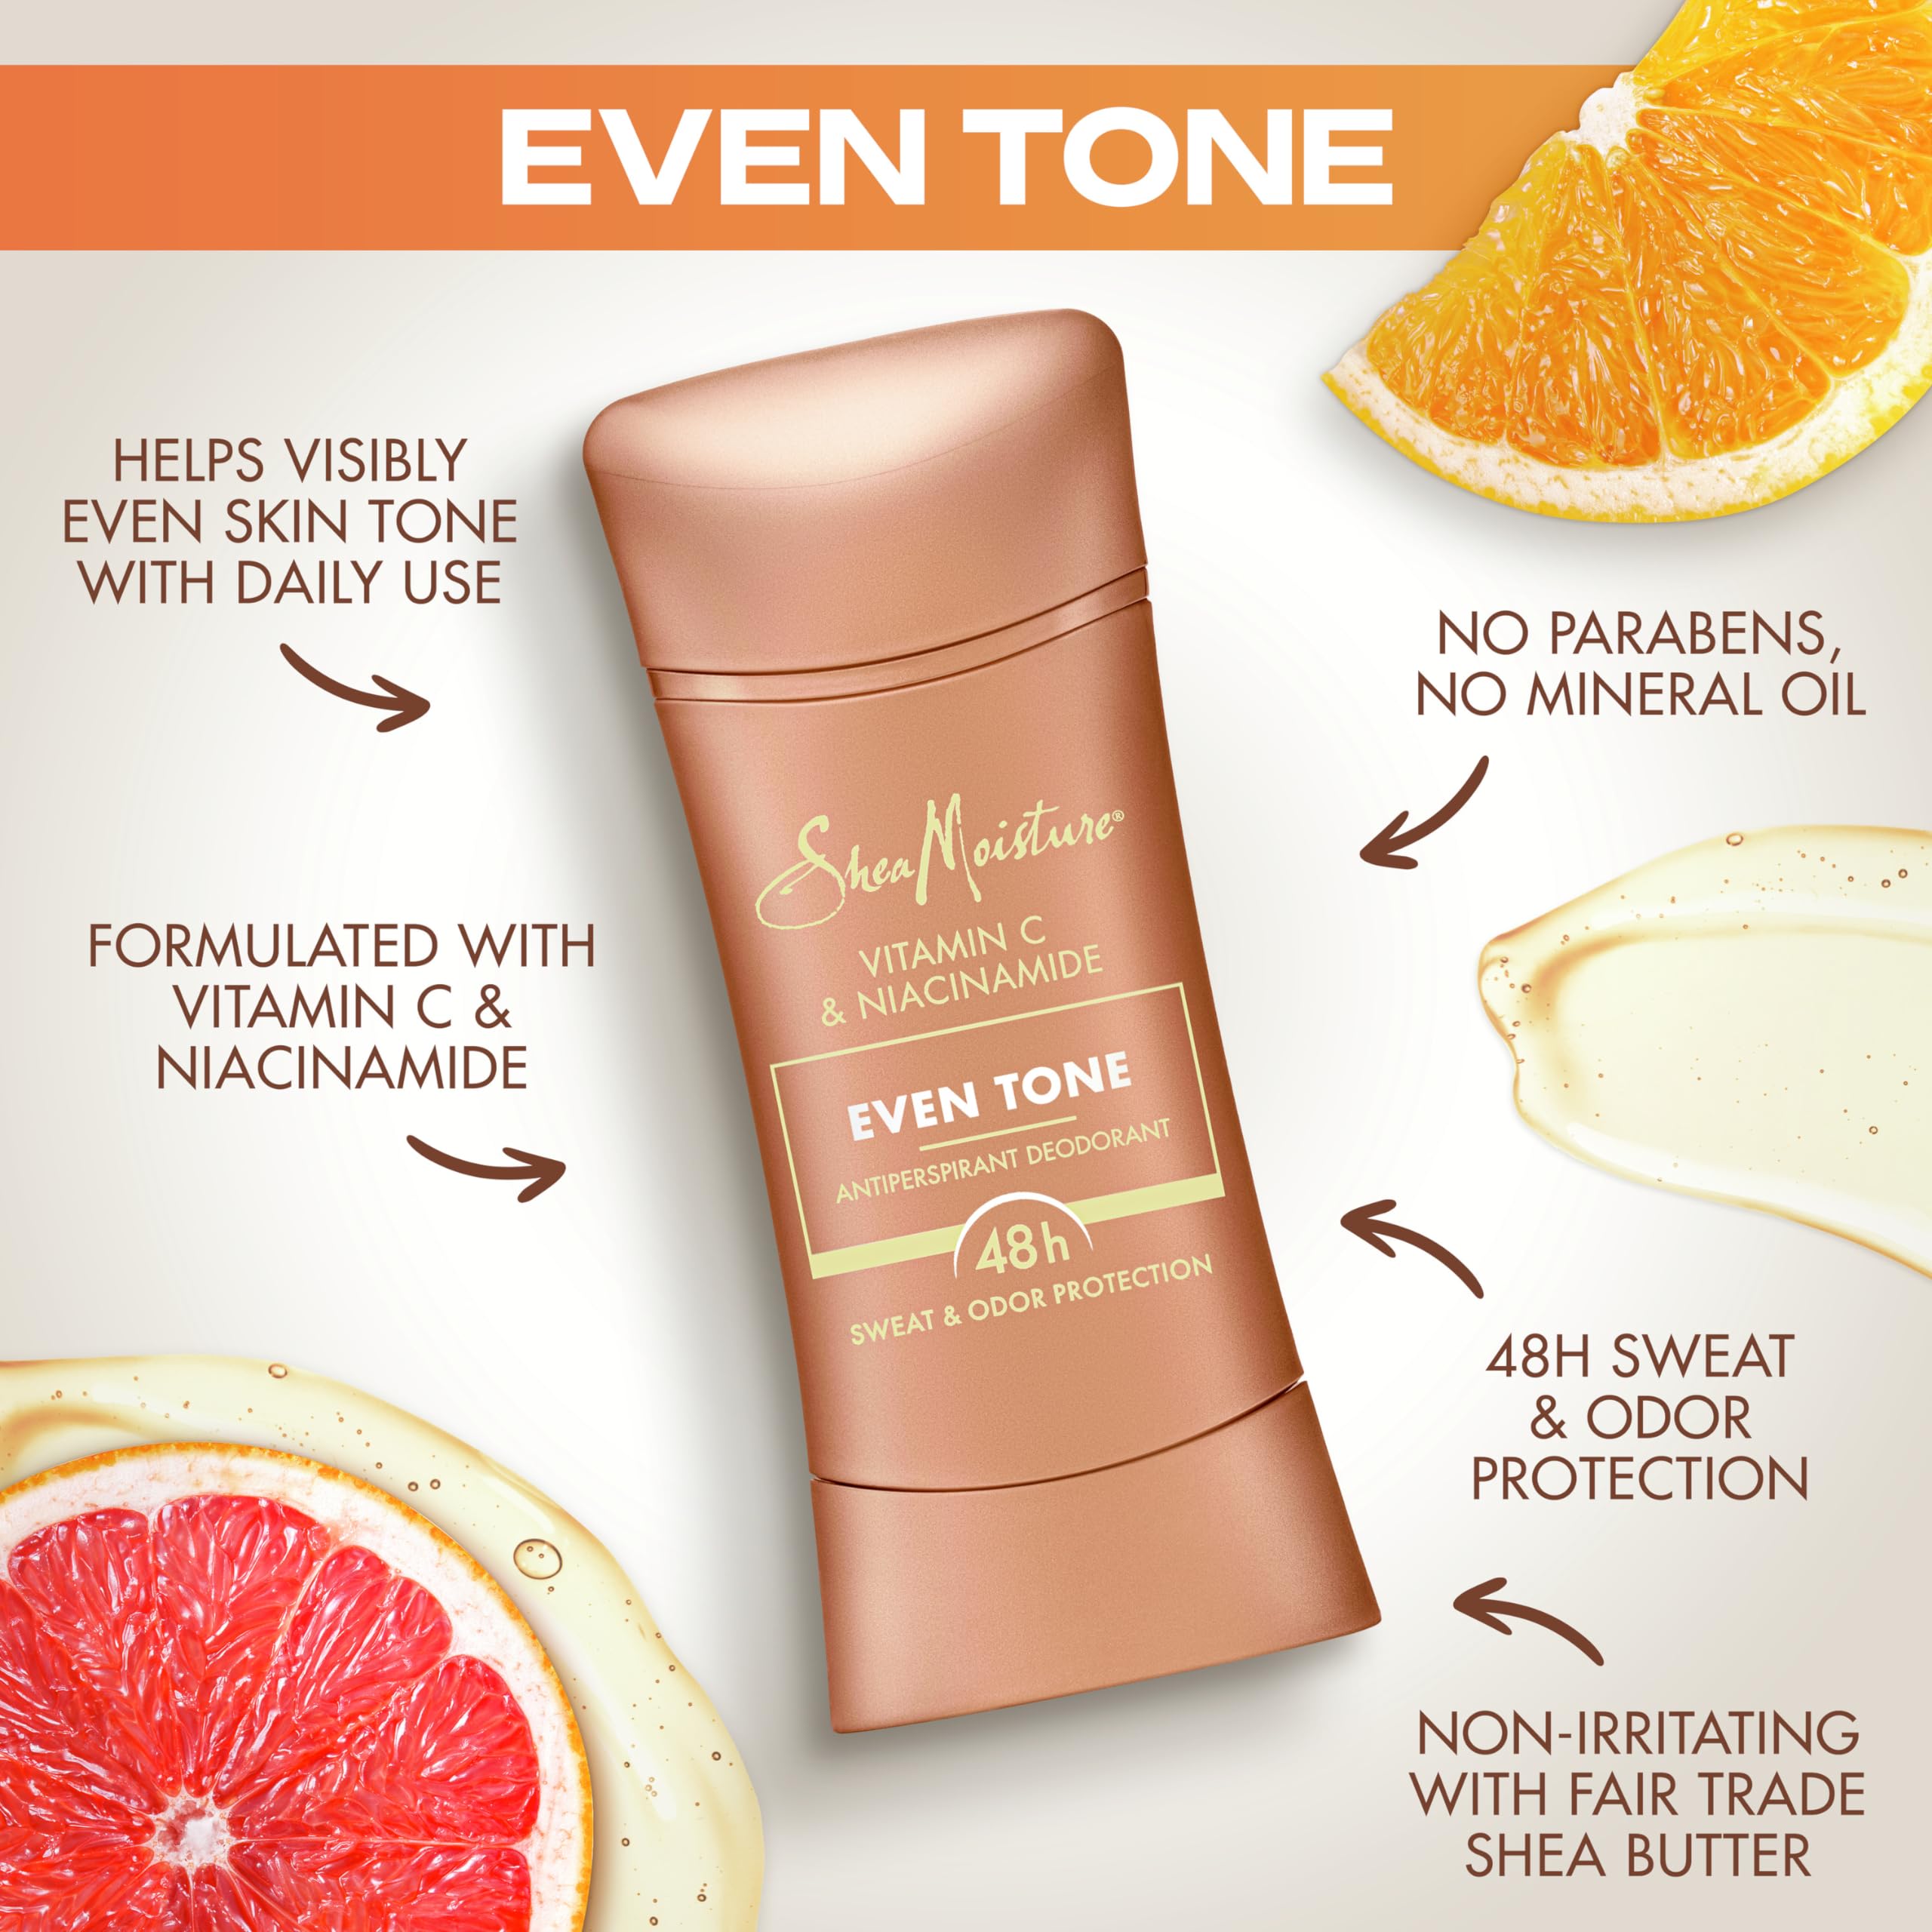 SheaMoisture Antiperspirant Deodorant Stick Even Tone Vitamin C & Niacinamide 2 Count for 48HR Sweat & Odor Protection with No Parabens & No Mineral Oil 2.6 oz